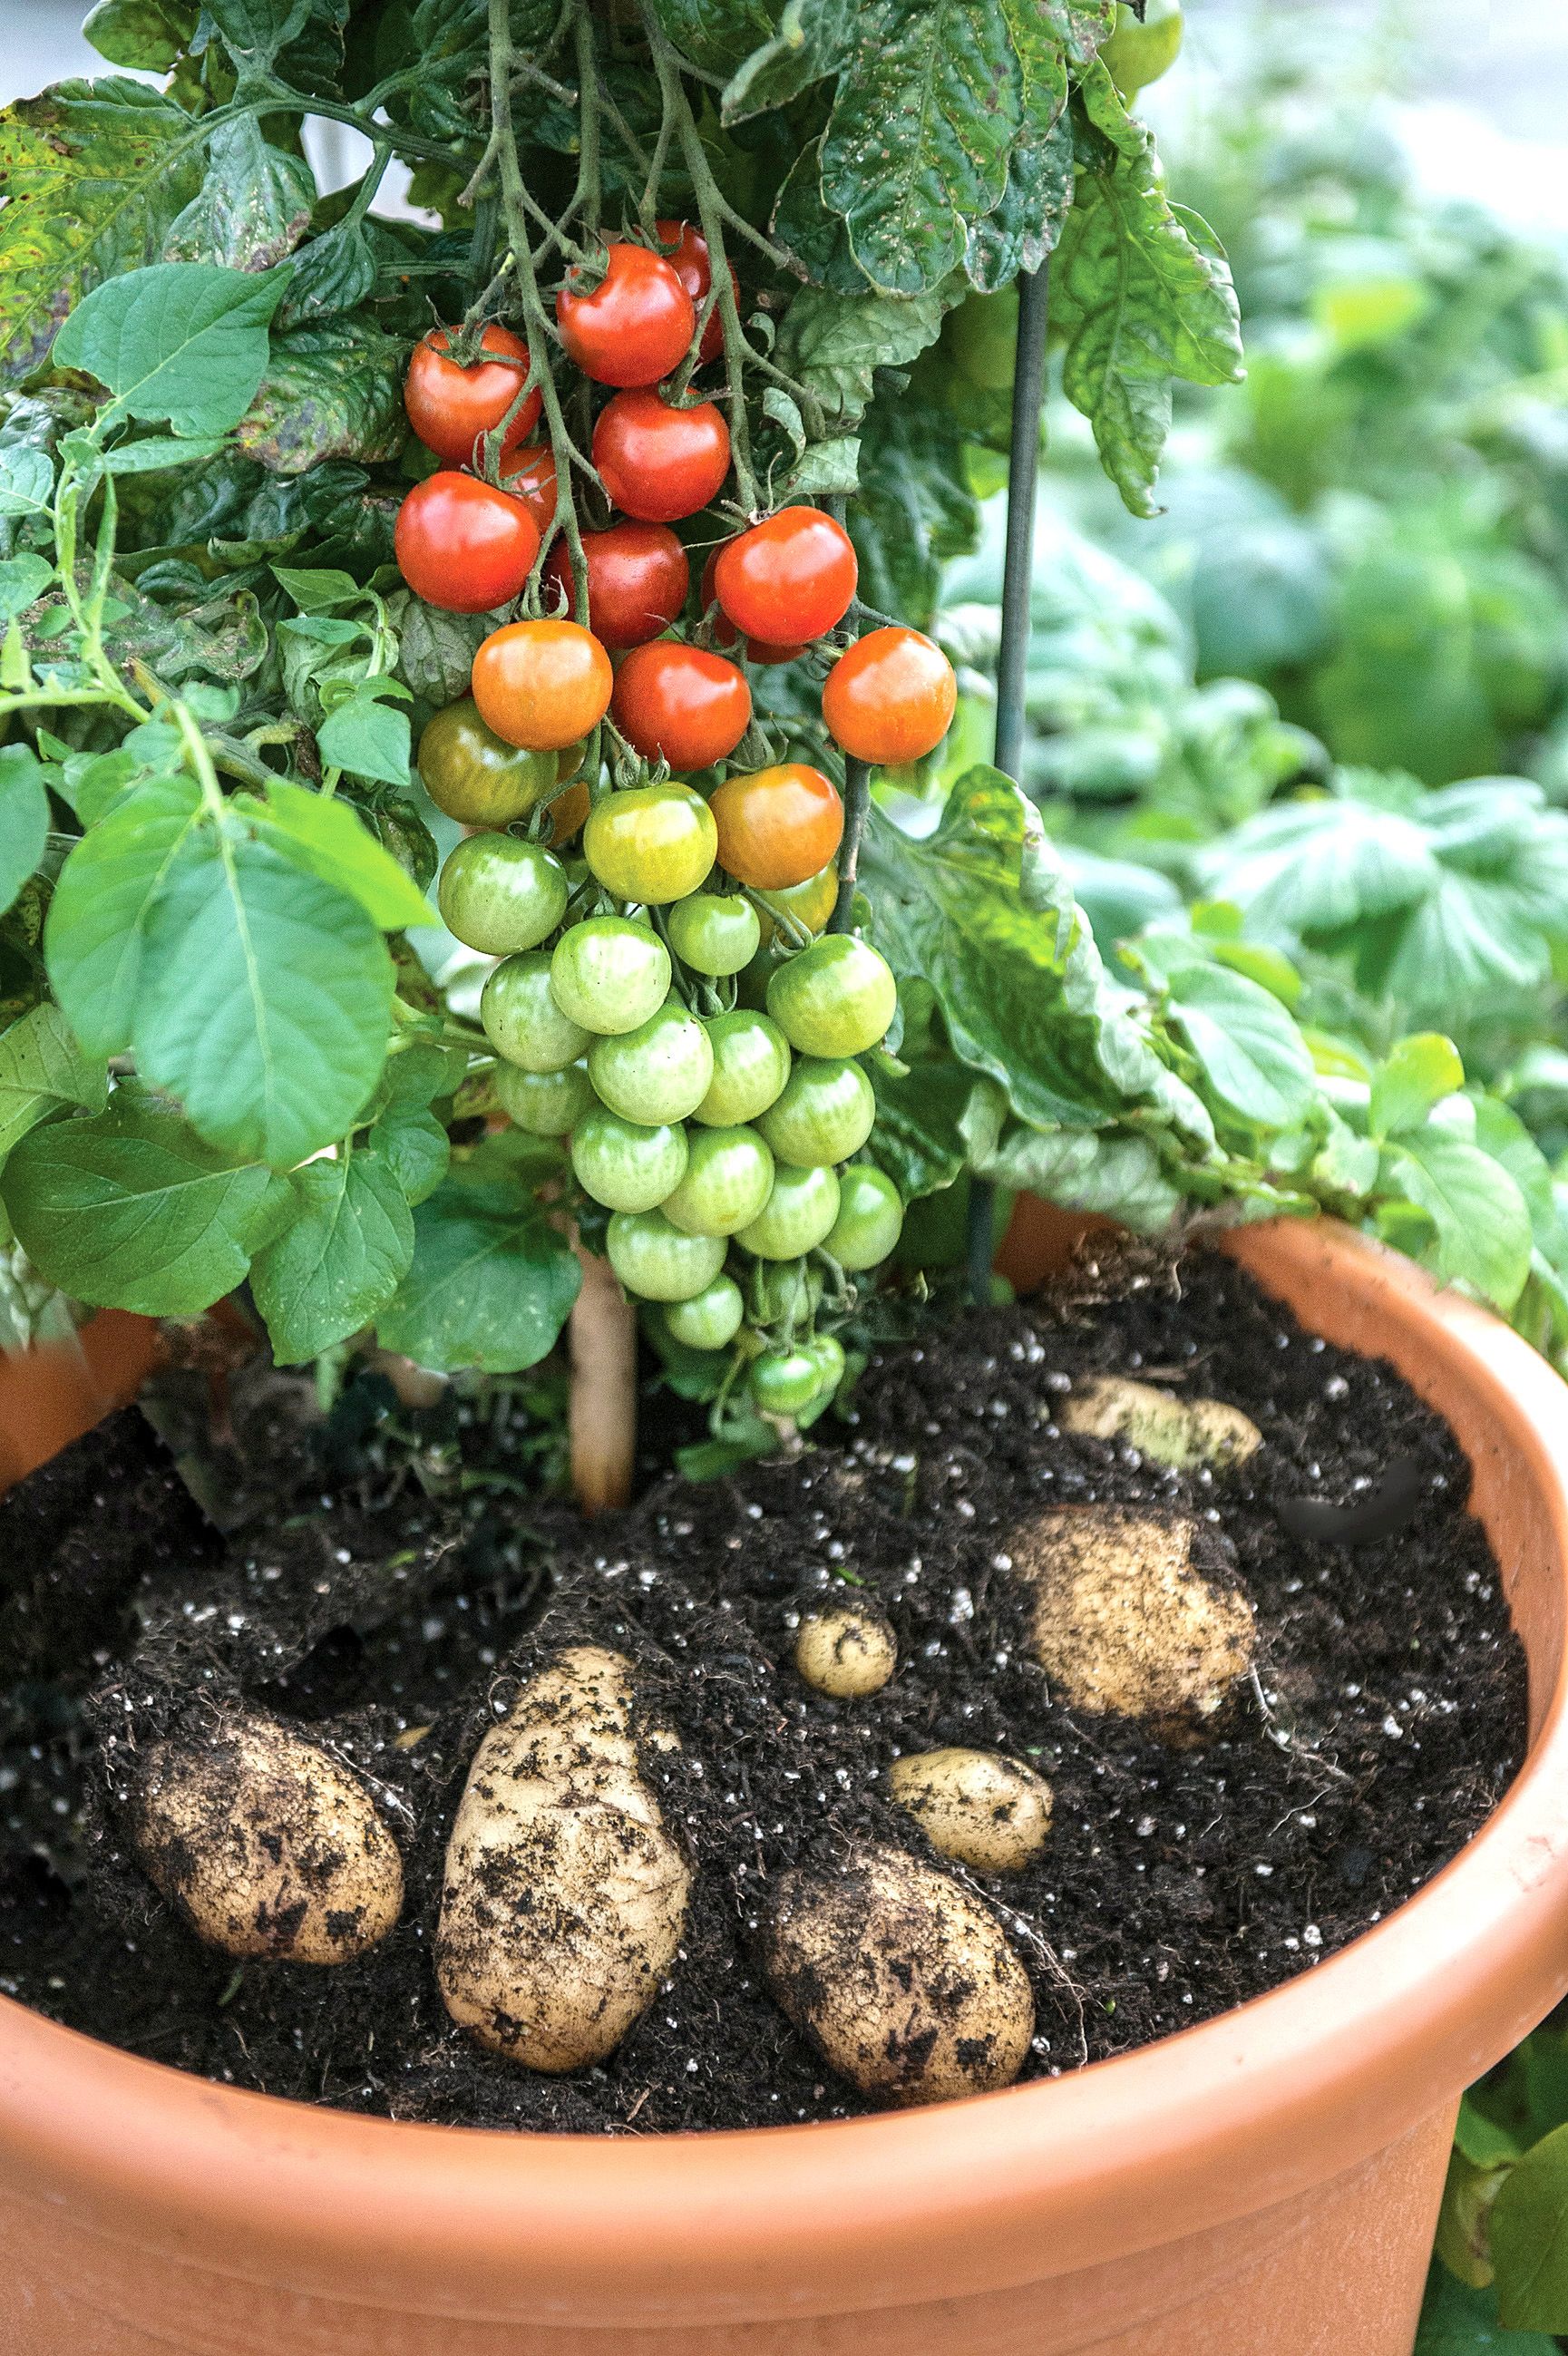 Image of Potato plant and tomato plant growing in a community garden